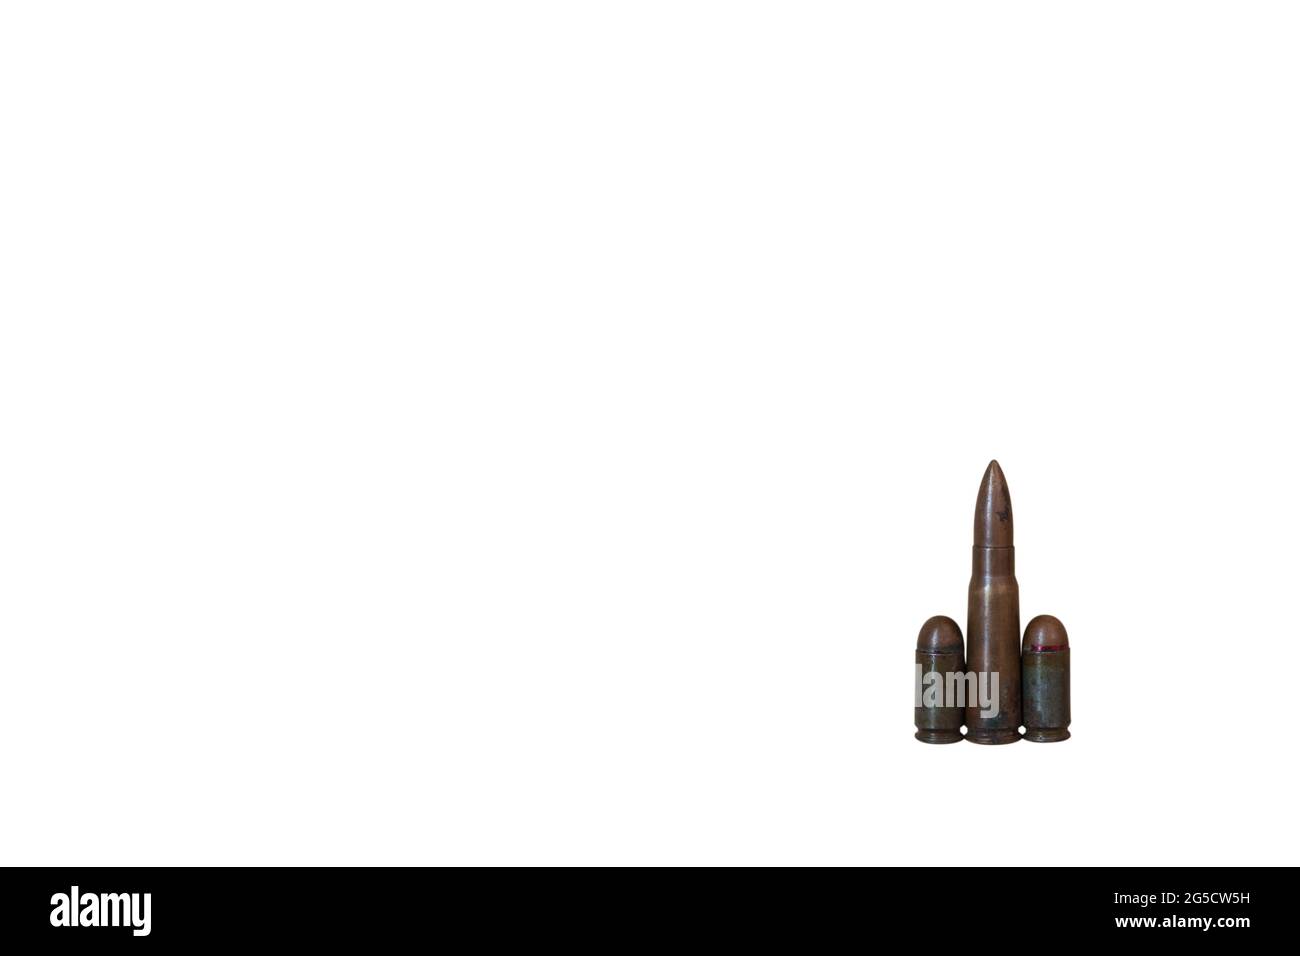 Three different caliber bullets together isolated on a white background. Bullets isolated on a white background. Military concept. Stock Photo